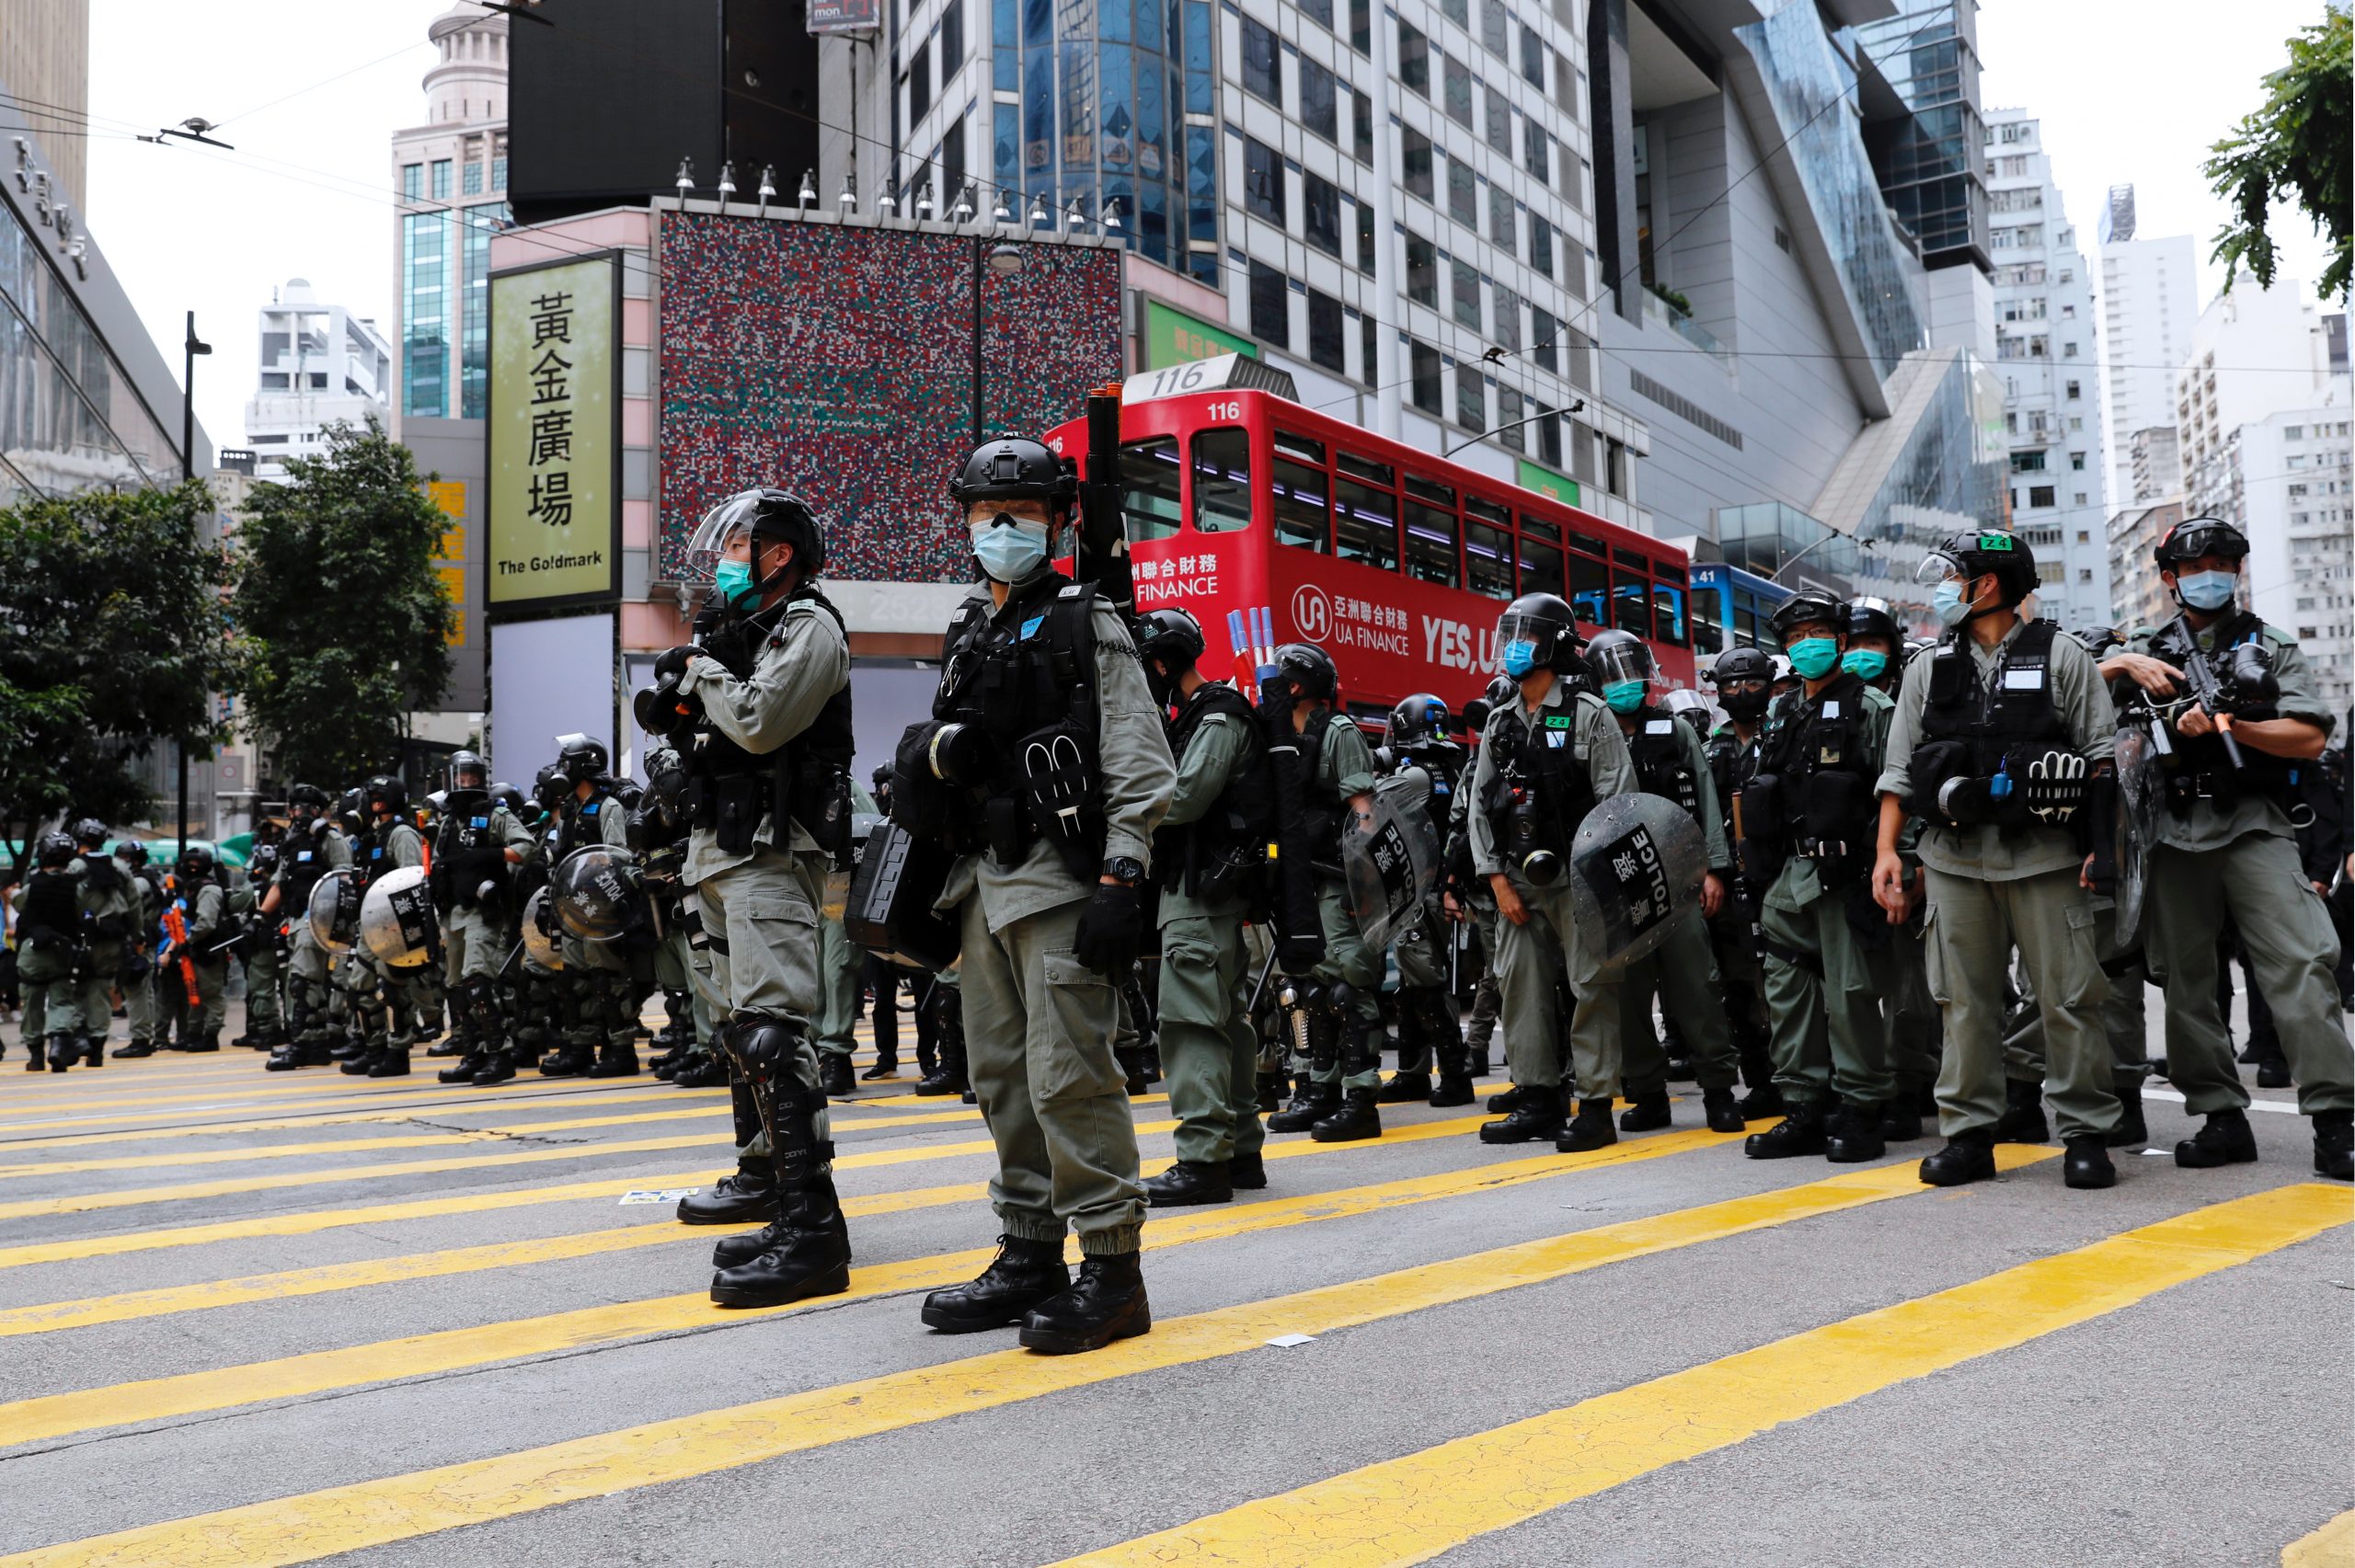 Riot police stand guard during a march against Beijing's plans to impose national security legislation in Hong Kong, China May 24, 2020. REUTERS/Tyrone Siu - RC2YUG9X7QWB